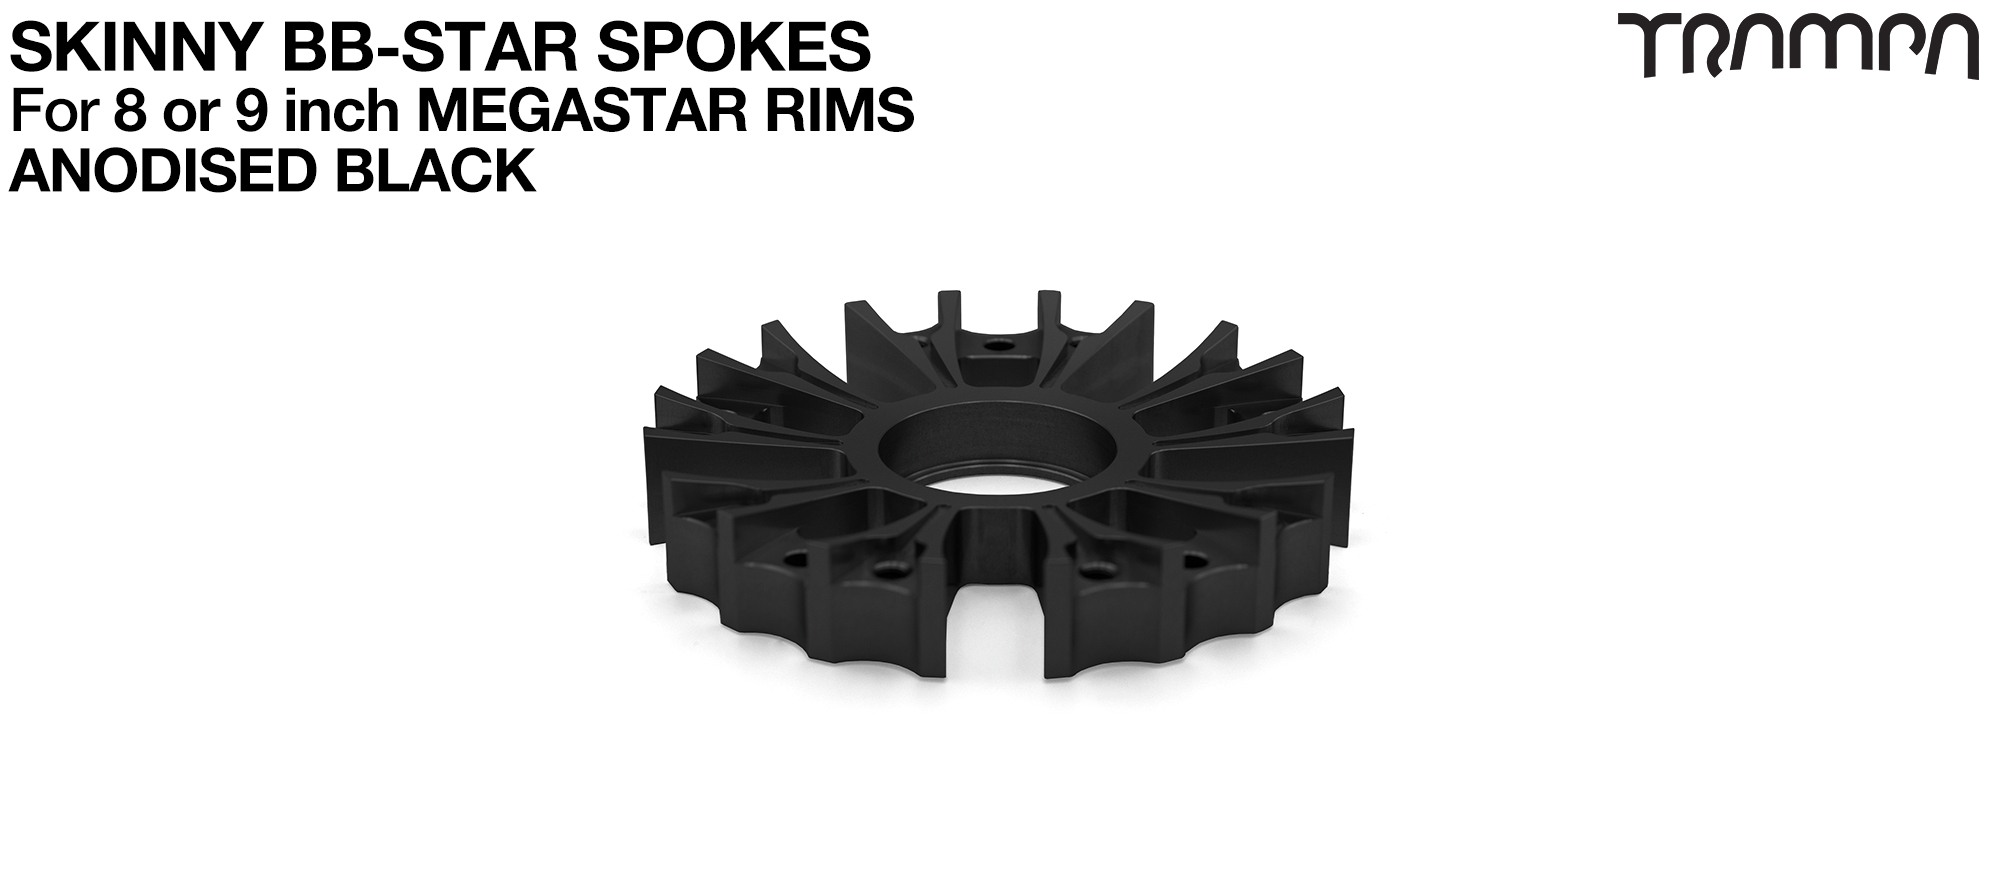 TRAMPA BBStar SKINNY Spoke - CNC Precision milled from a solid Billet & Anodised pretty much any colour to your taste. FITS any MEGASTAR Rims (COPY)